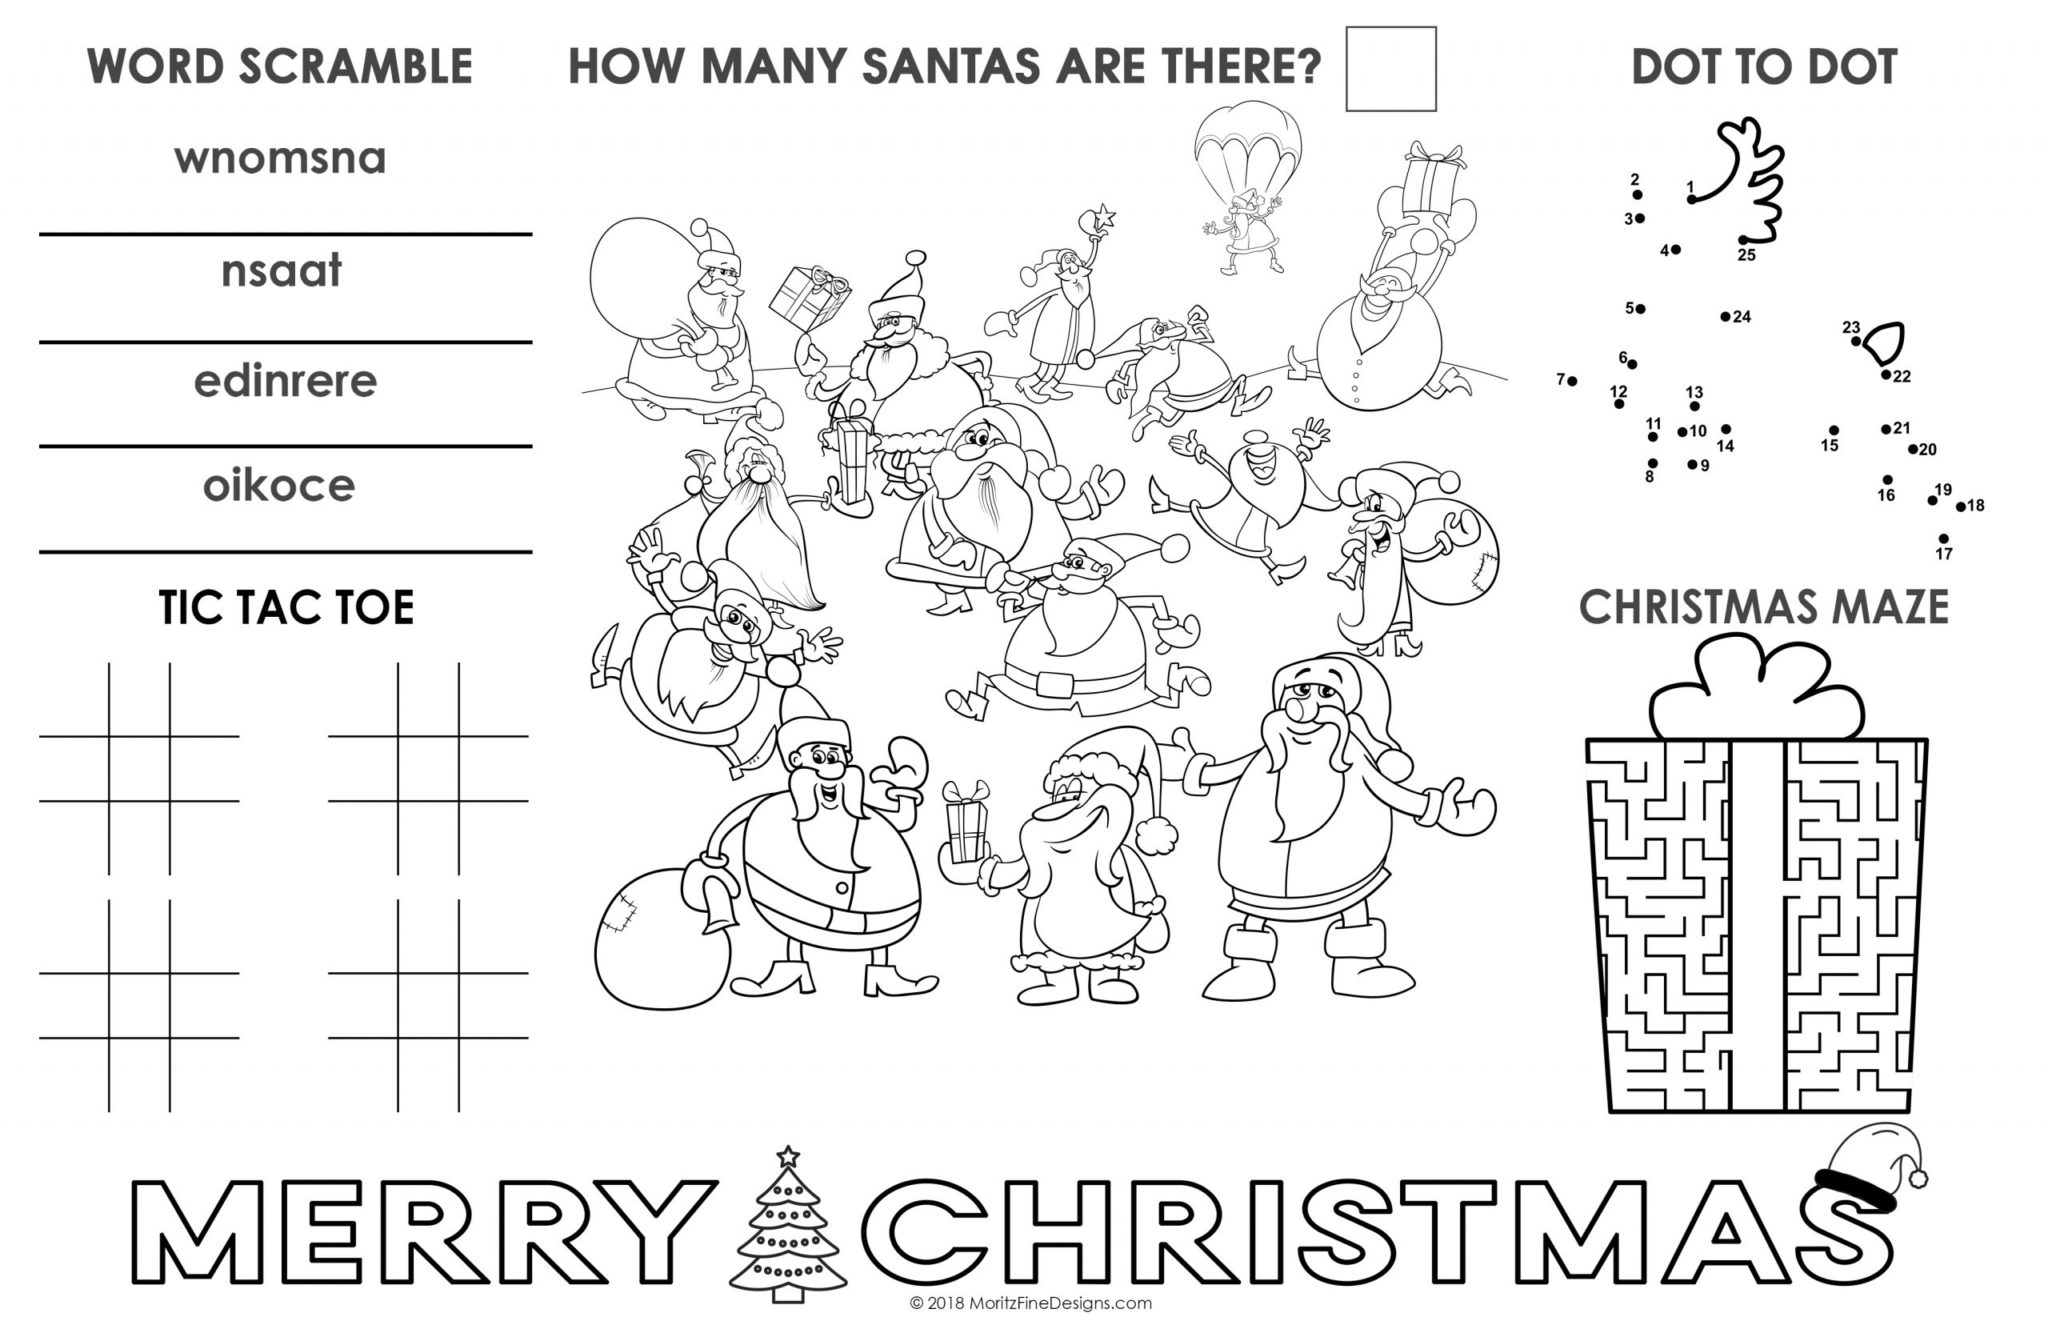 Make Christmas even more fun for the kids...at mealtime use the free printable Christmas Placemat so the kids have lots of fun activities to work on.